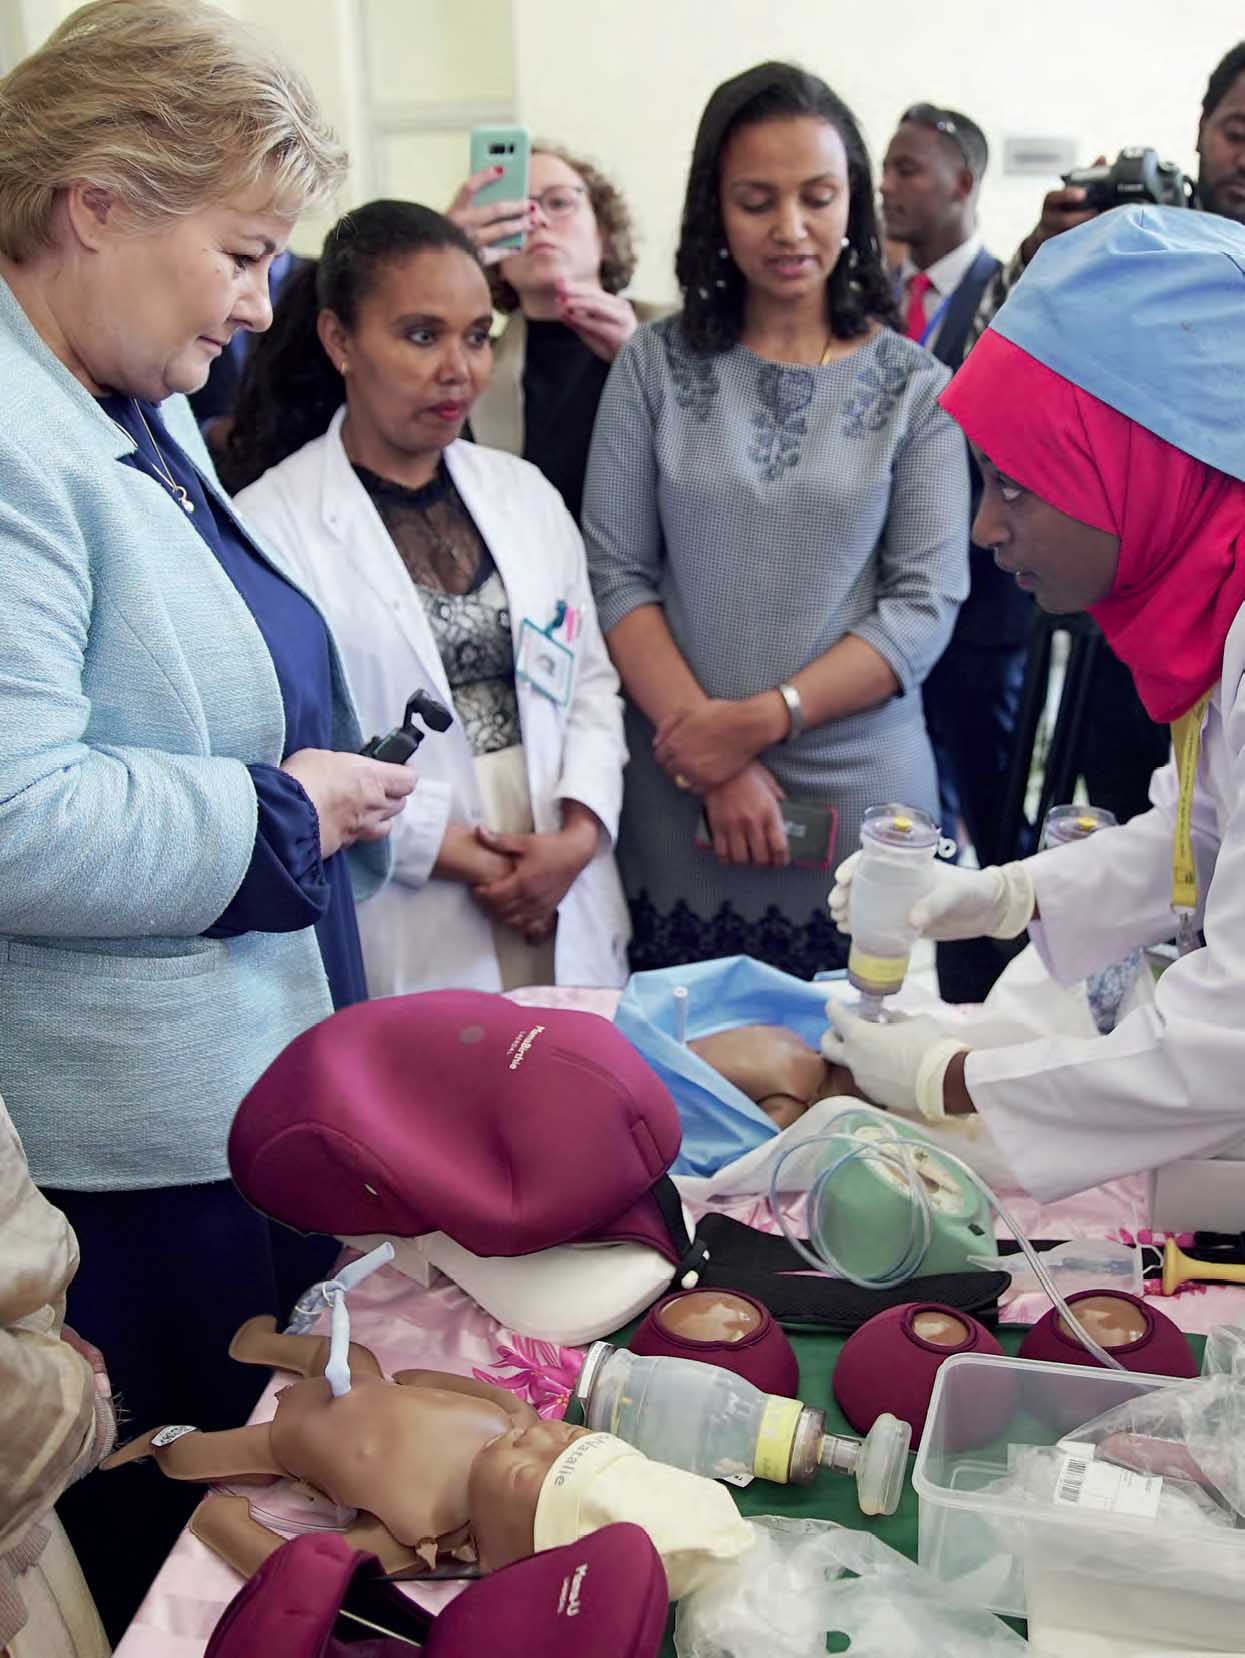 midwife Shemsiya Teyib is introducing the 50,000 Happy Birthdays project to Erna Solberg (left), Norwegian Prime Minister, and Meseret Zelalem (right), Director for Maternal, Child Health and Nutrition at the Federal Ministry of Health, at a health centre in Addis Ababa in February 2020.